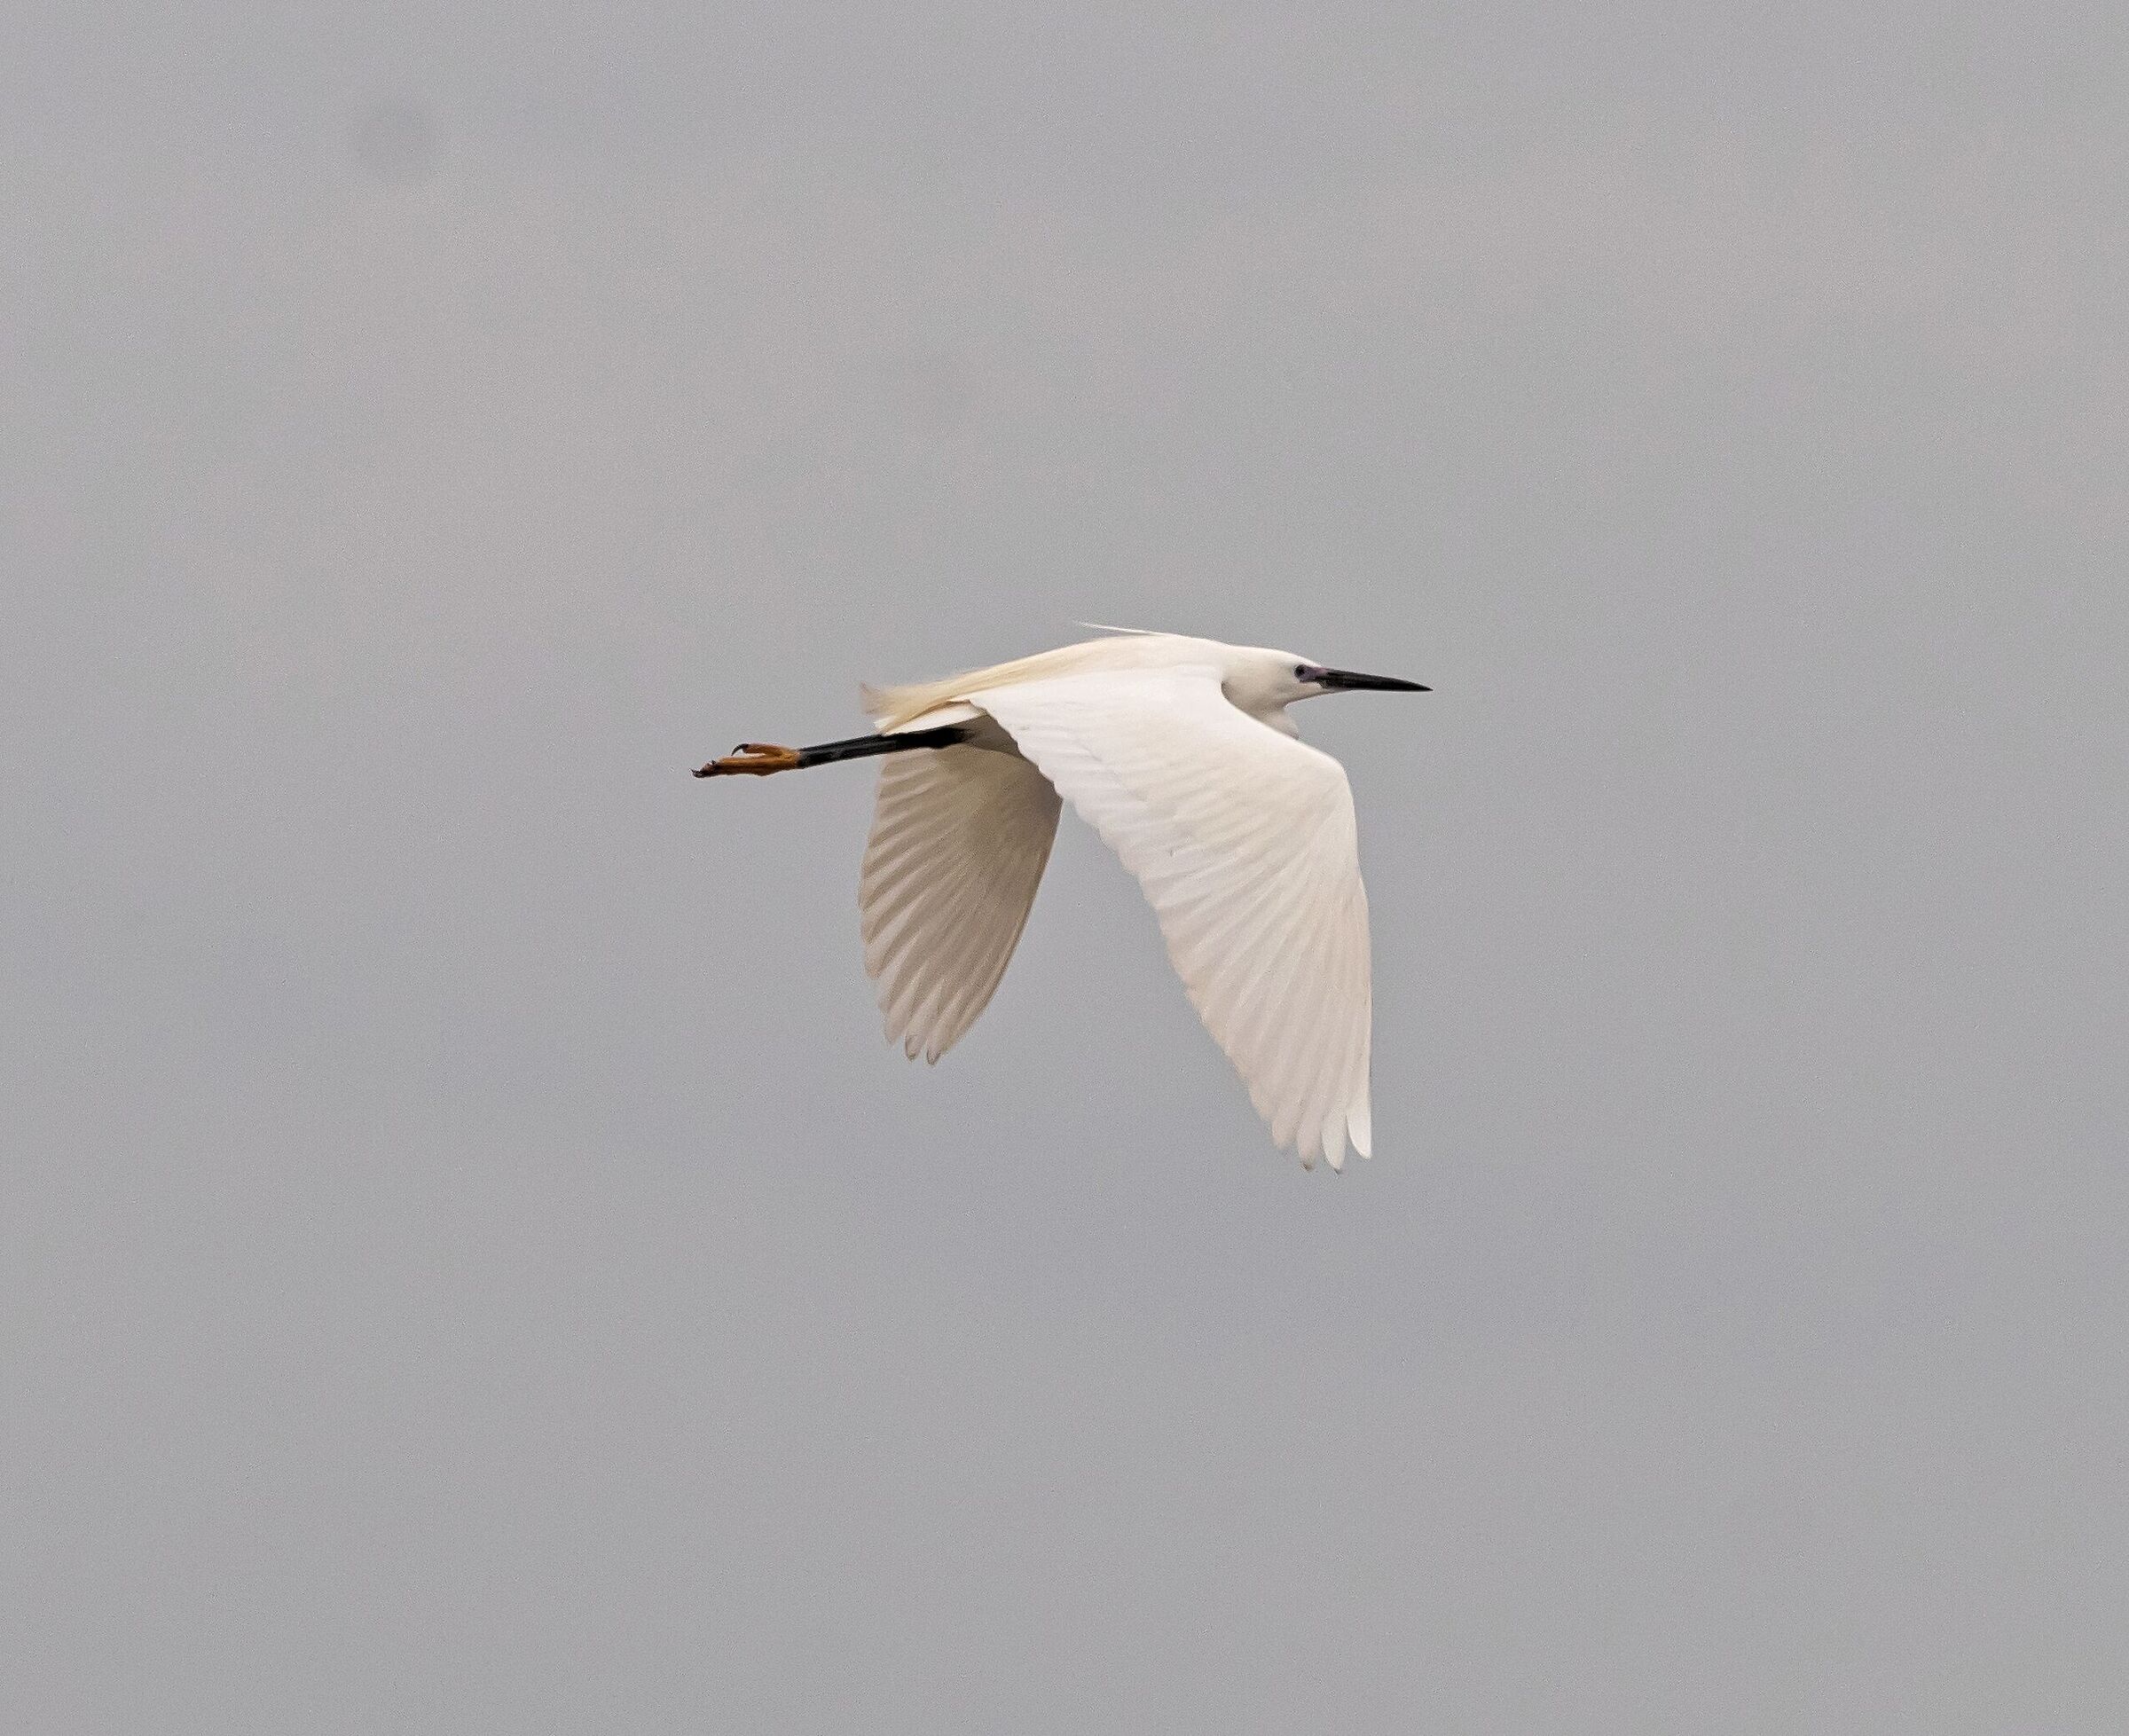 EGRET FLYING IN THE RICE FIELDS 30/04/2021...